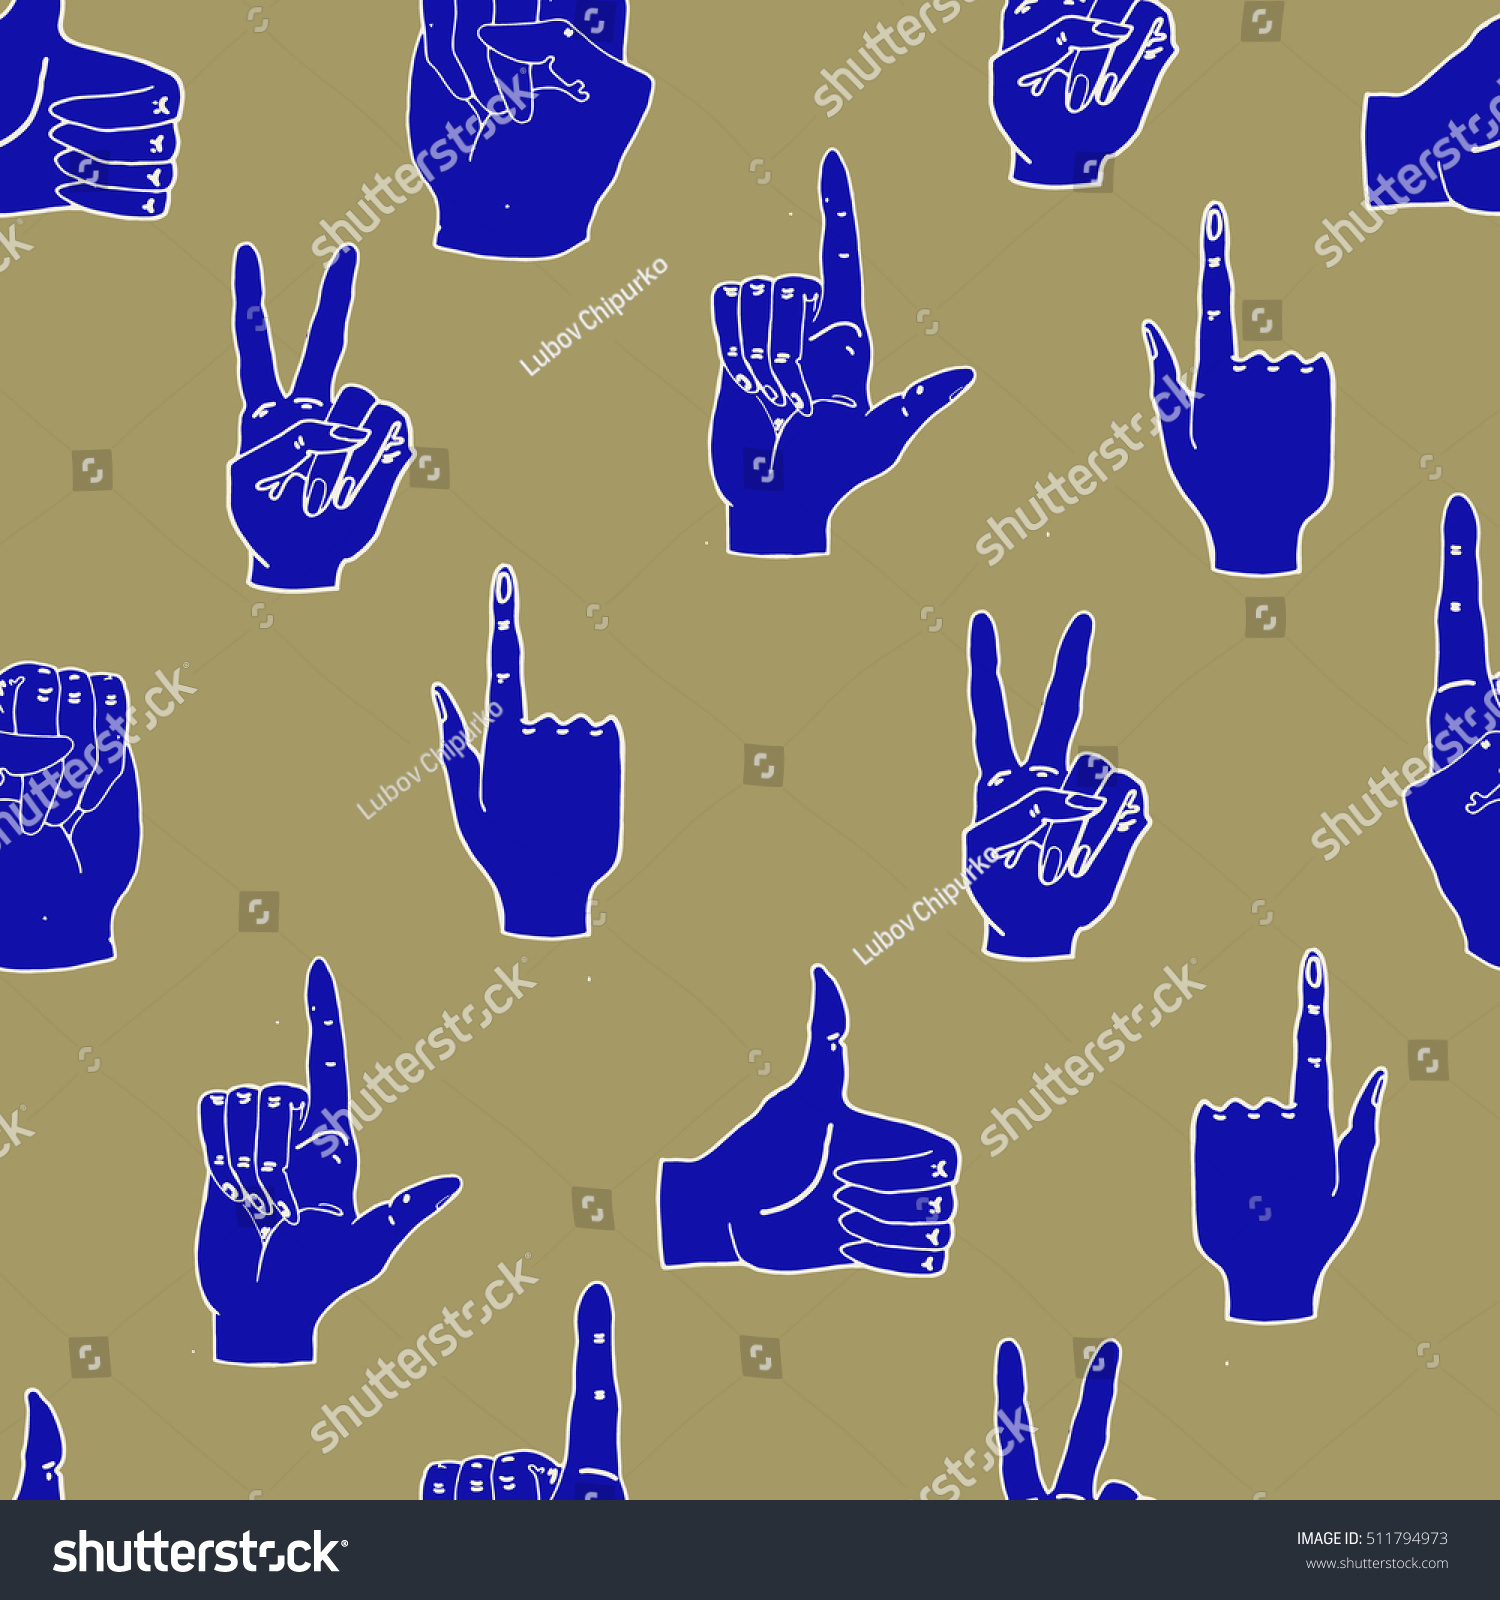 Seamless Pattern Hands Gestures Stock Vector Royalty Free 511794973 6810